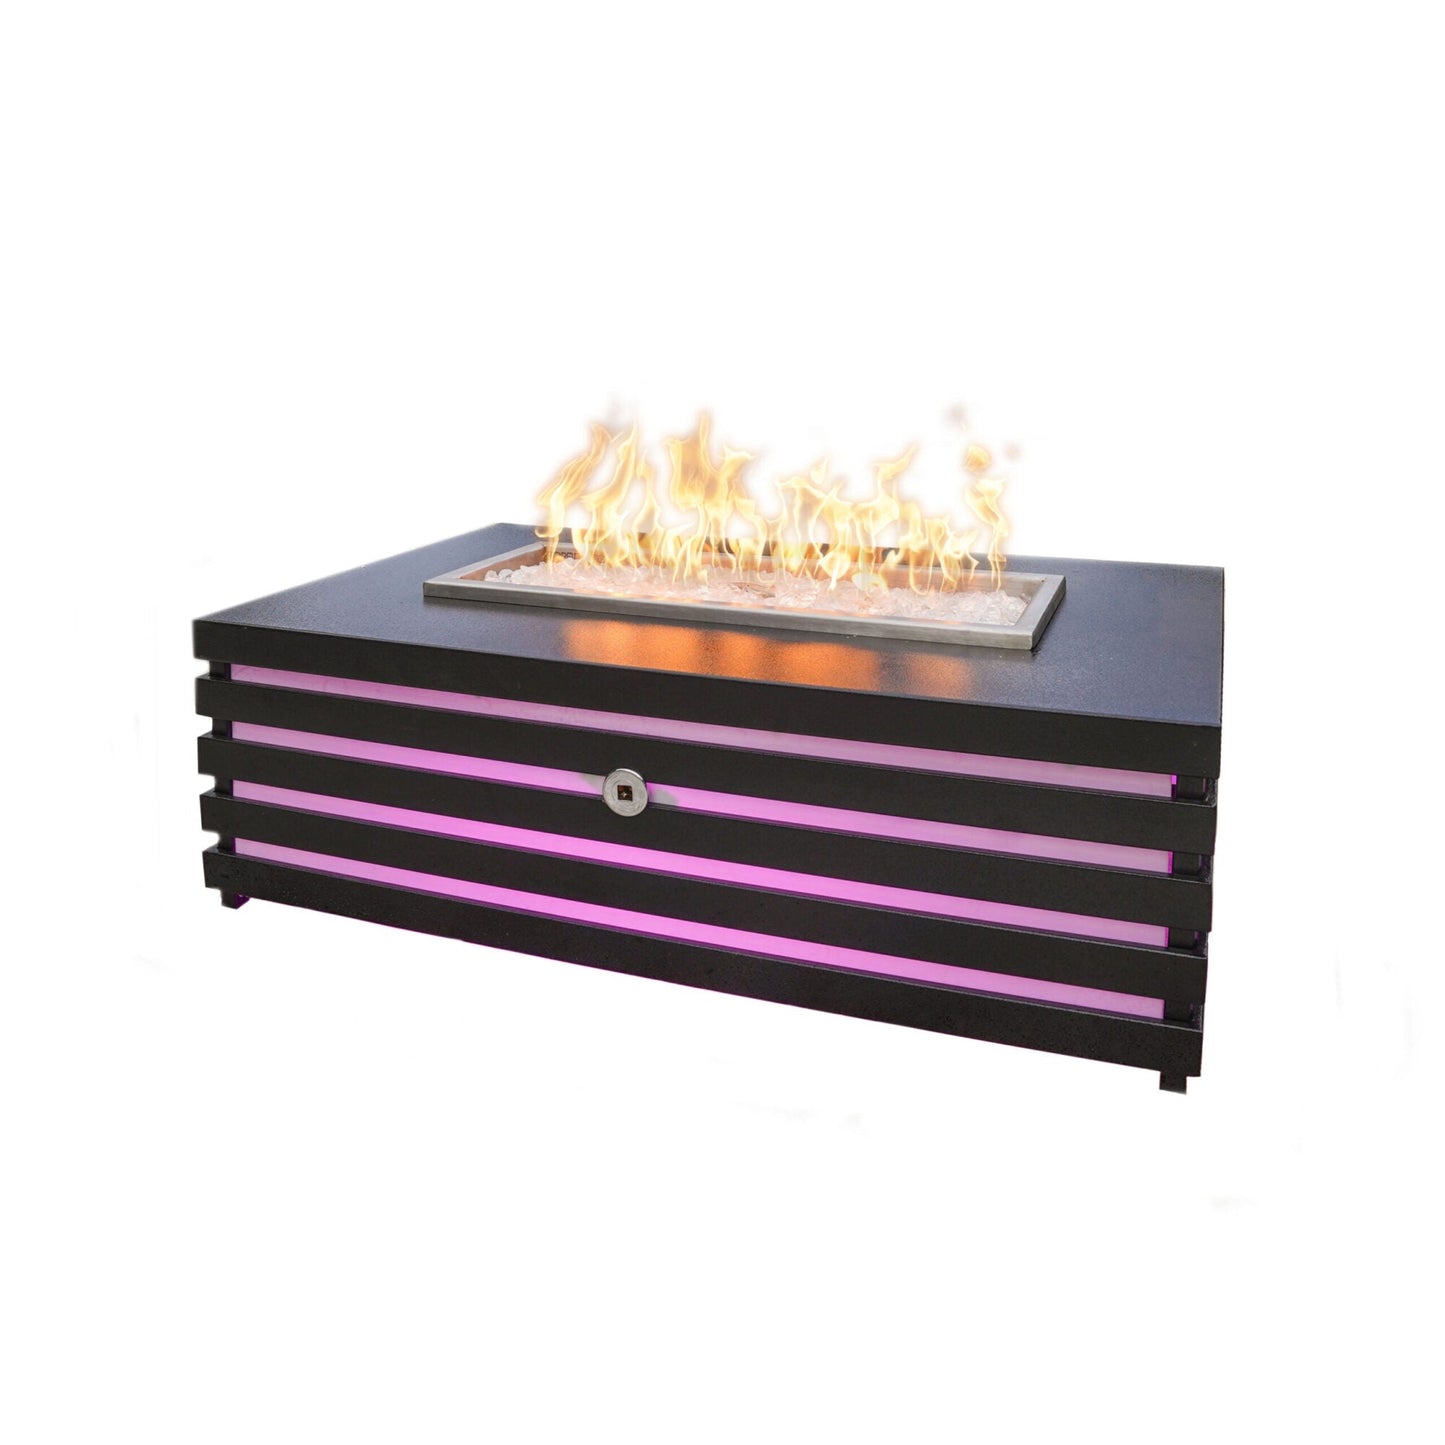 The Outdoor Plus Amina 60" Java Powder Coated Natural Gas Fire Pit with 110V Electronic Ignition